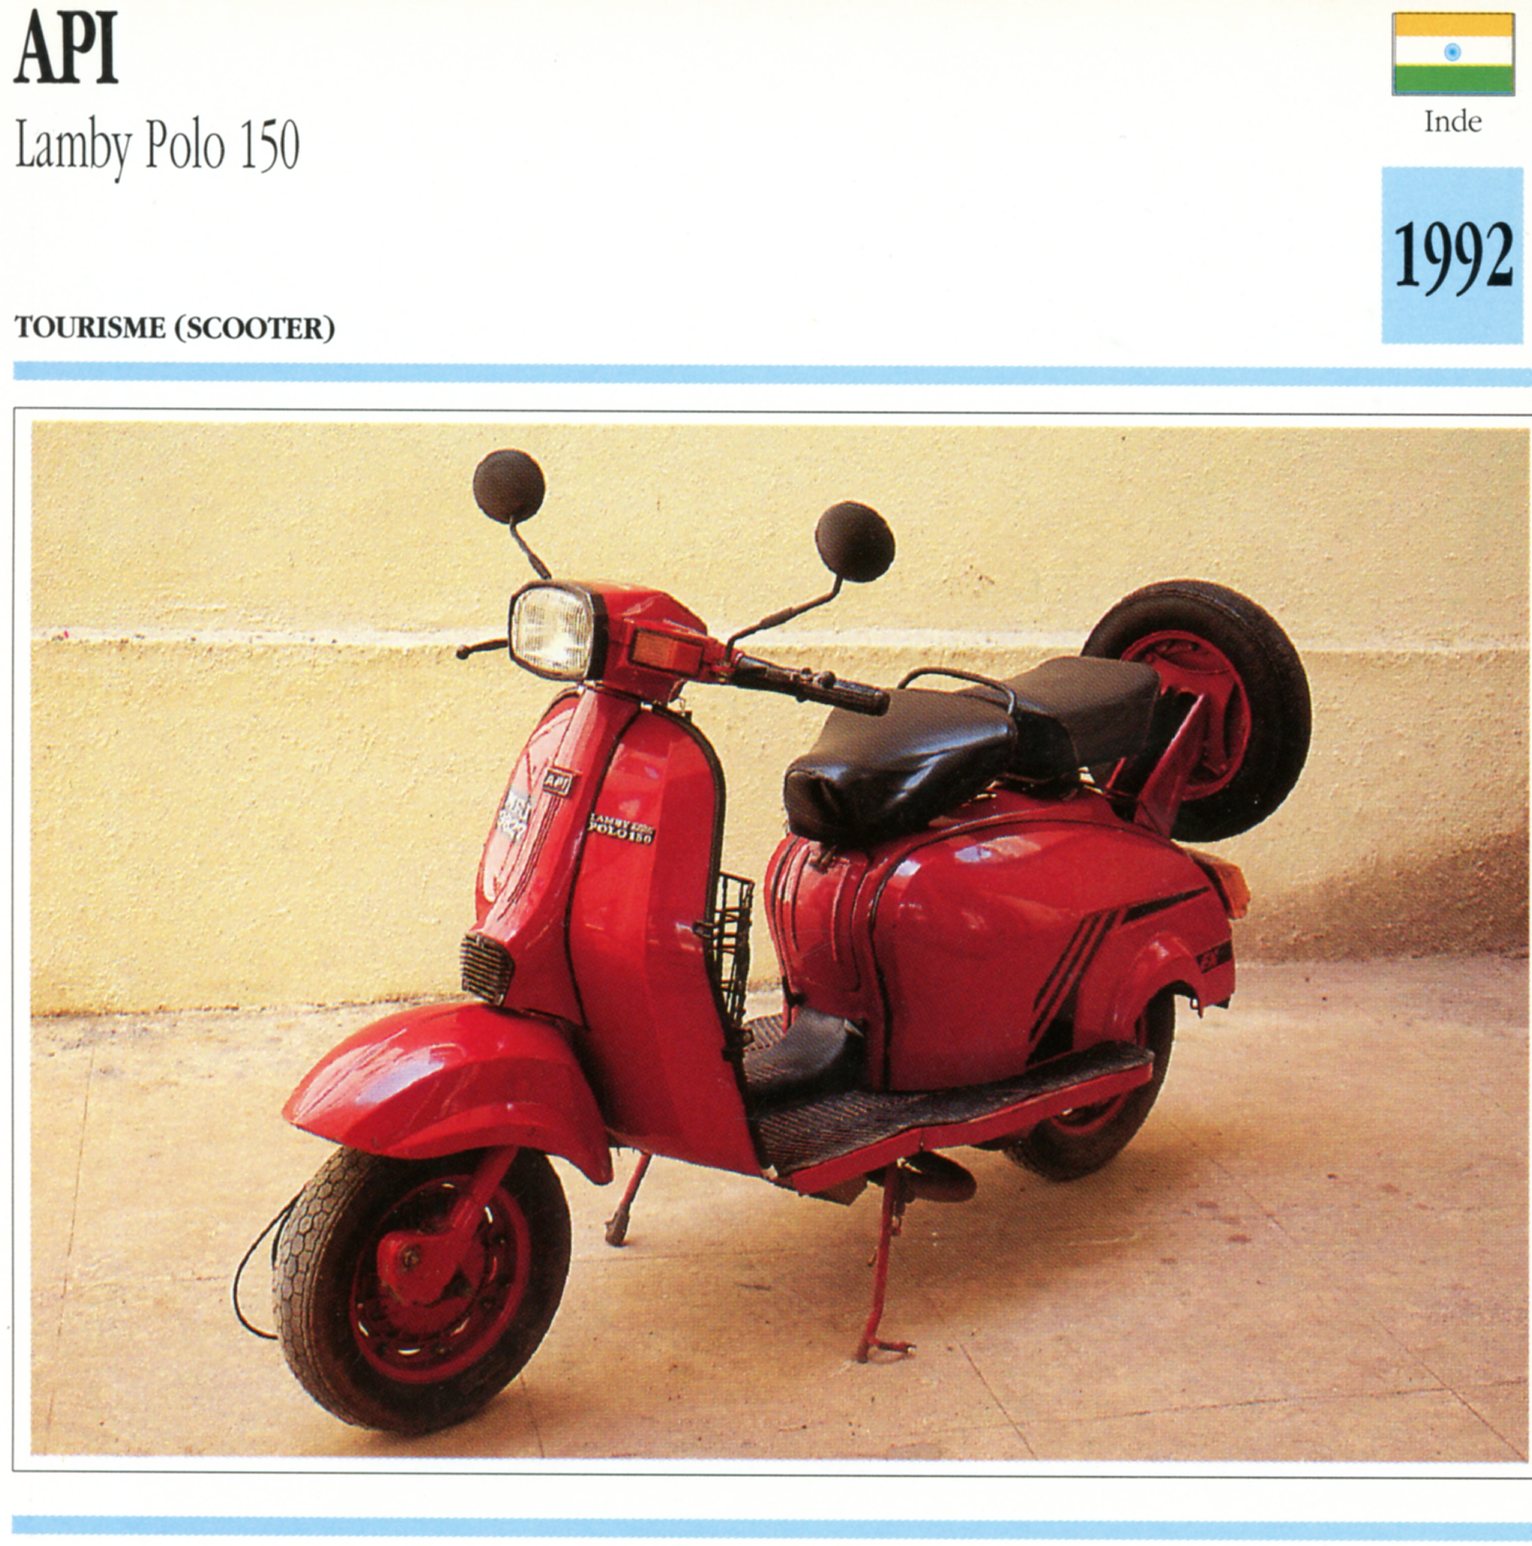 API LAMBY POLO 150 SCOOTER  1992-CARTE-CARD-FICHE-SCOOTER-LEMASTERBROCKERS